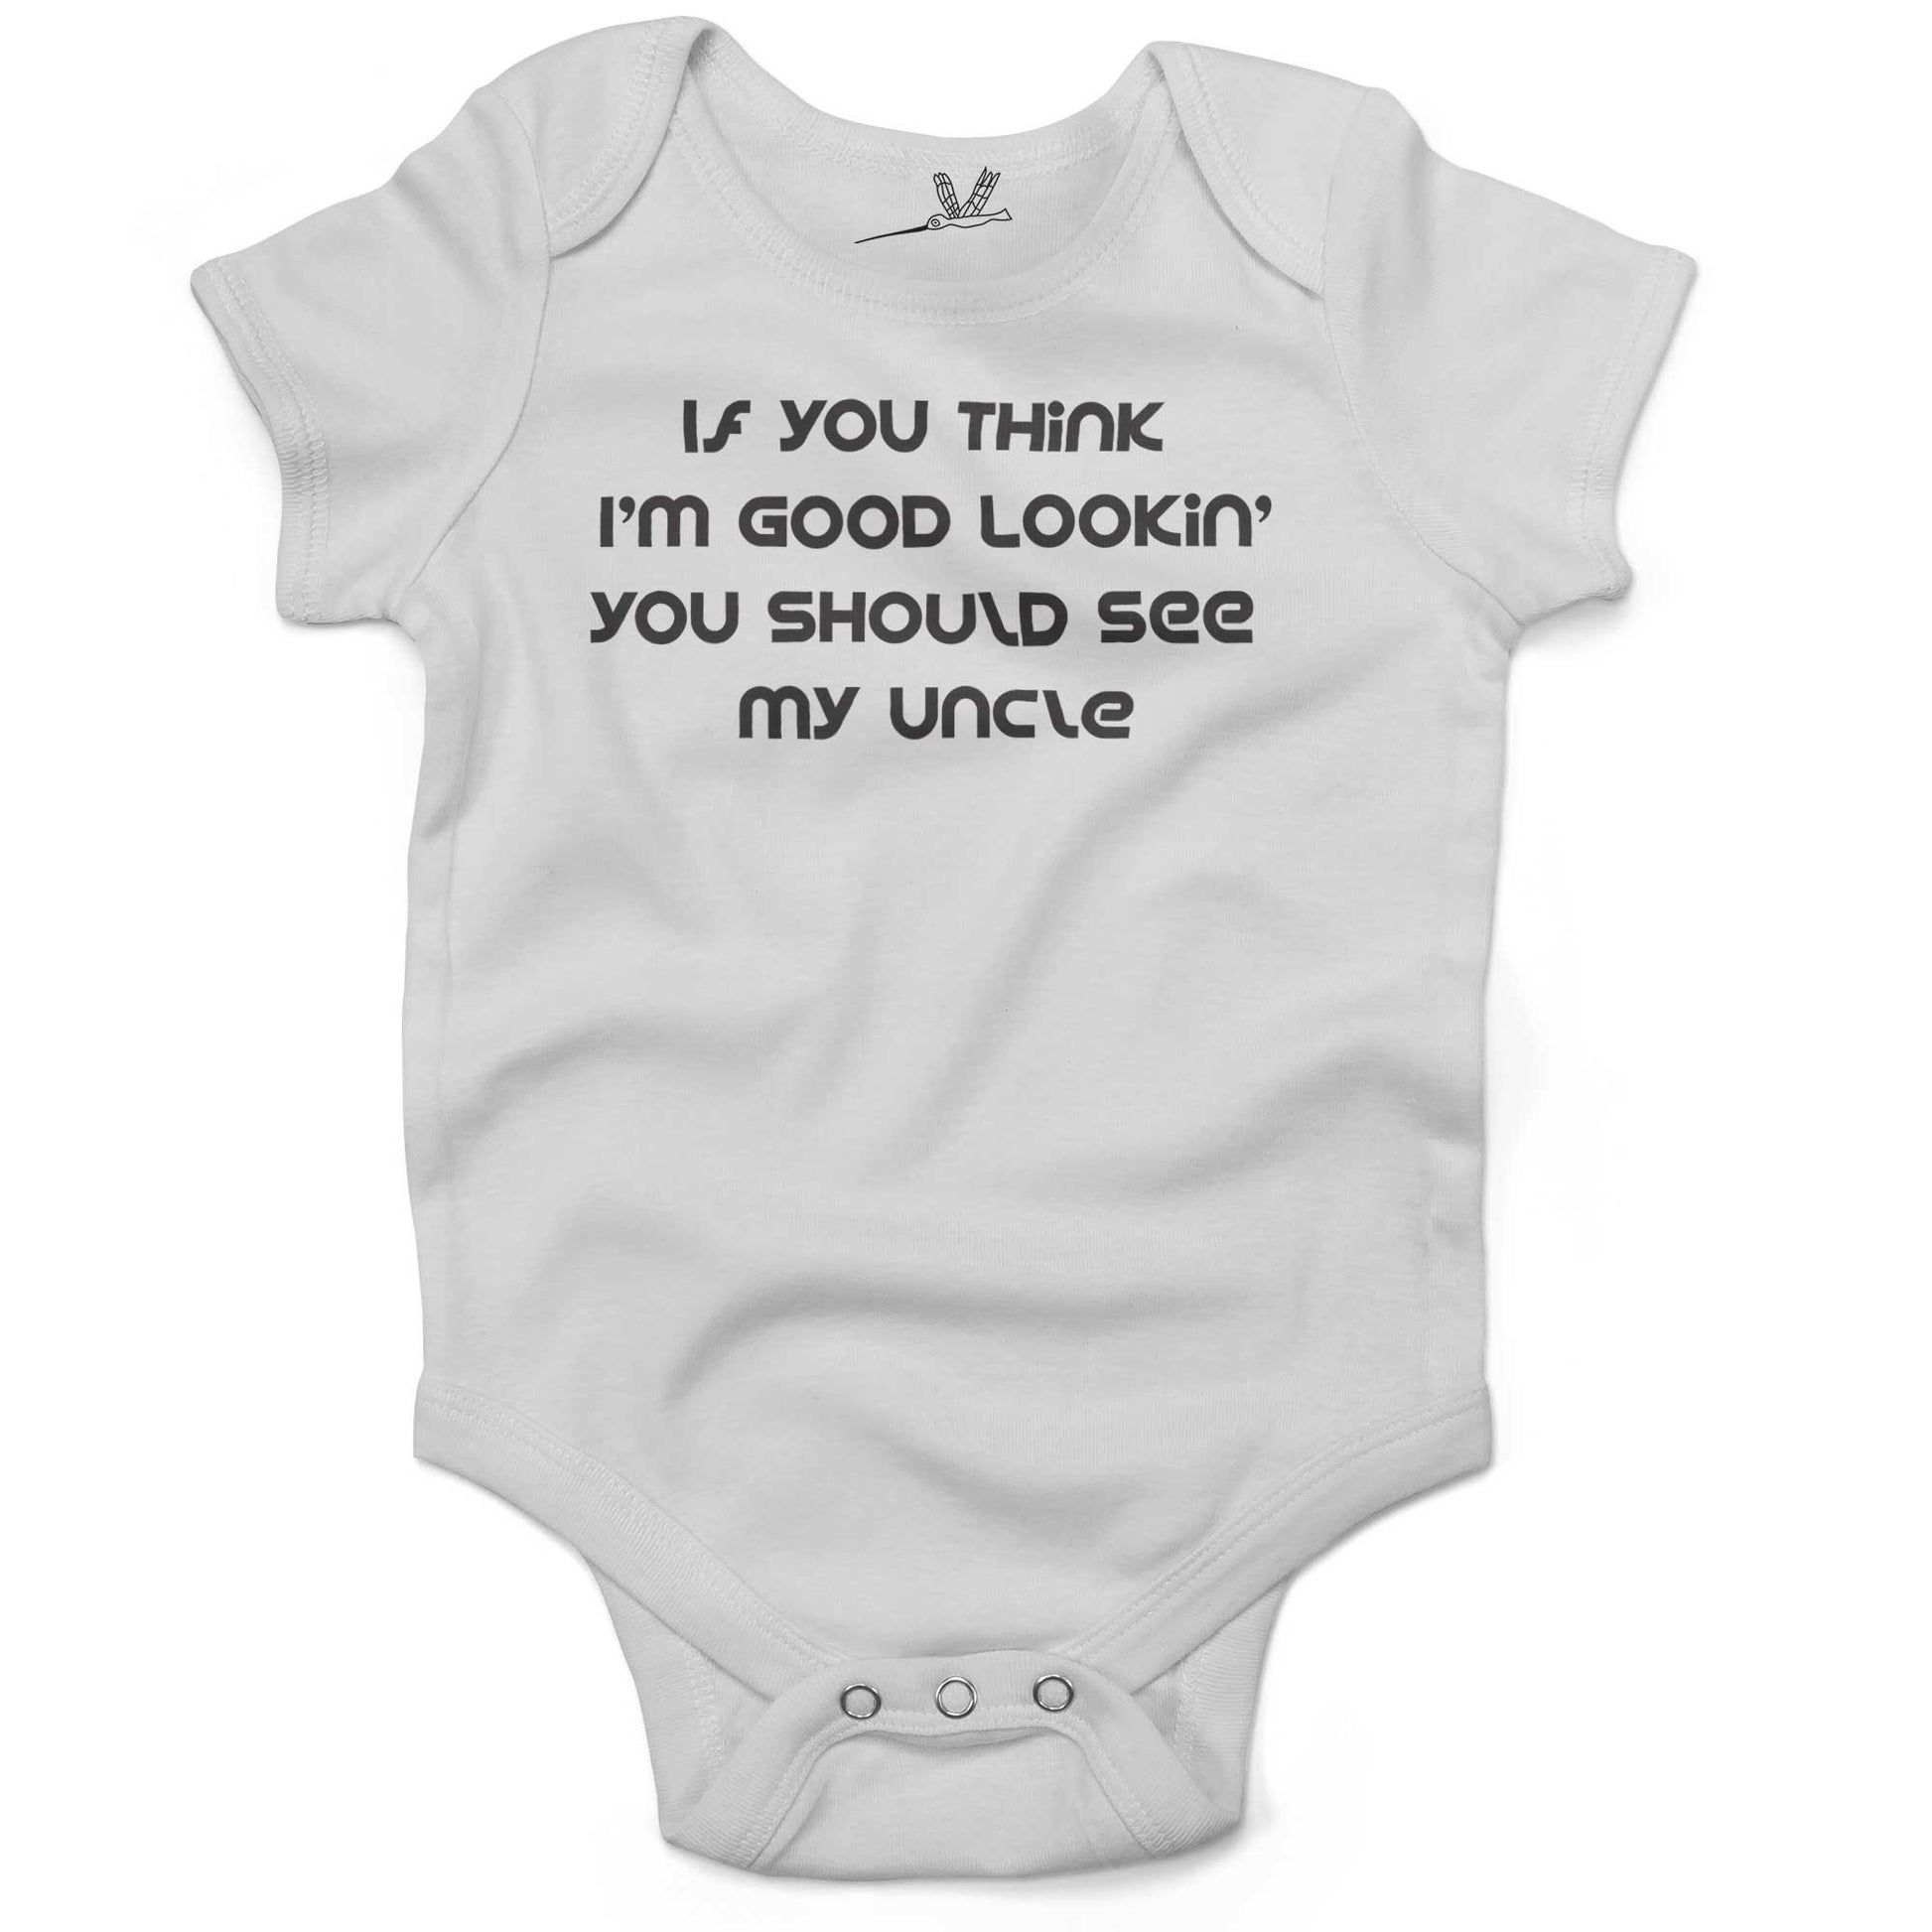 If You Think I'm Good Lookin' You Should See My Uncle Infant Bodysuit or Raglan Tee-White-3-6 months